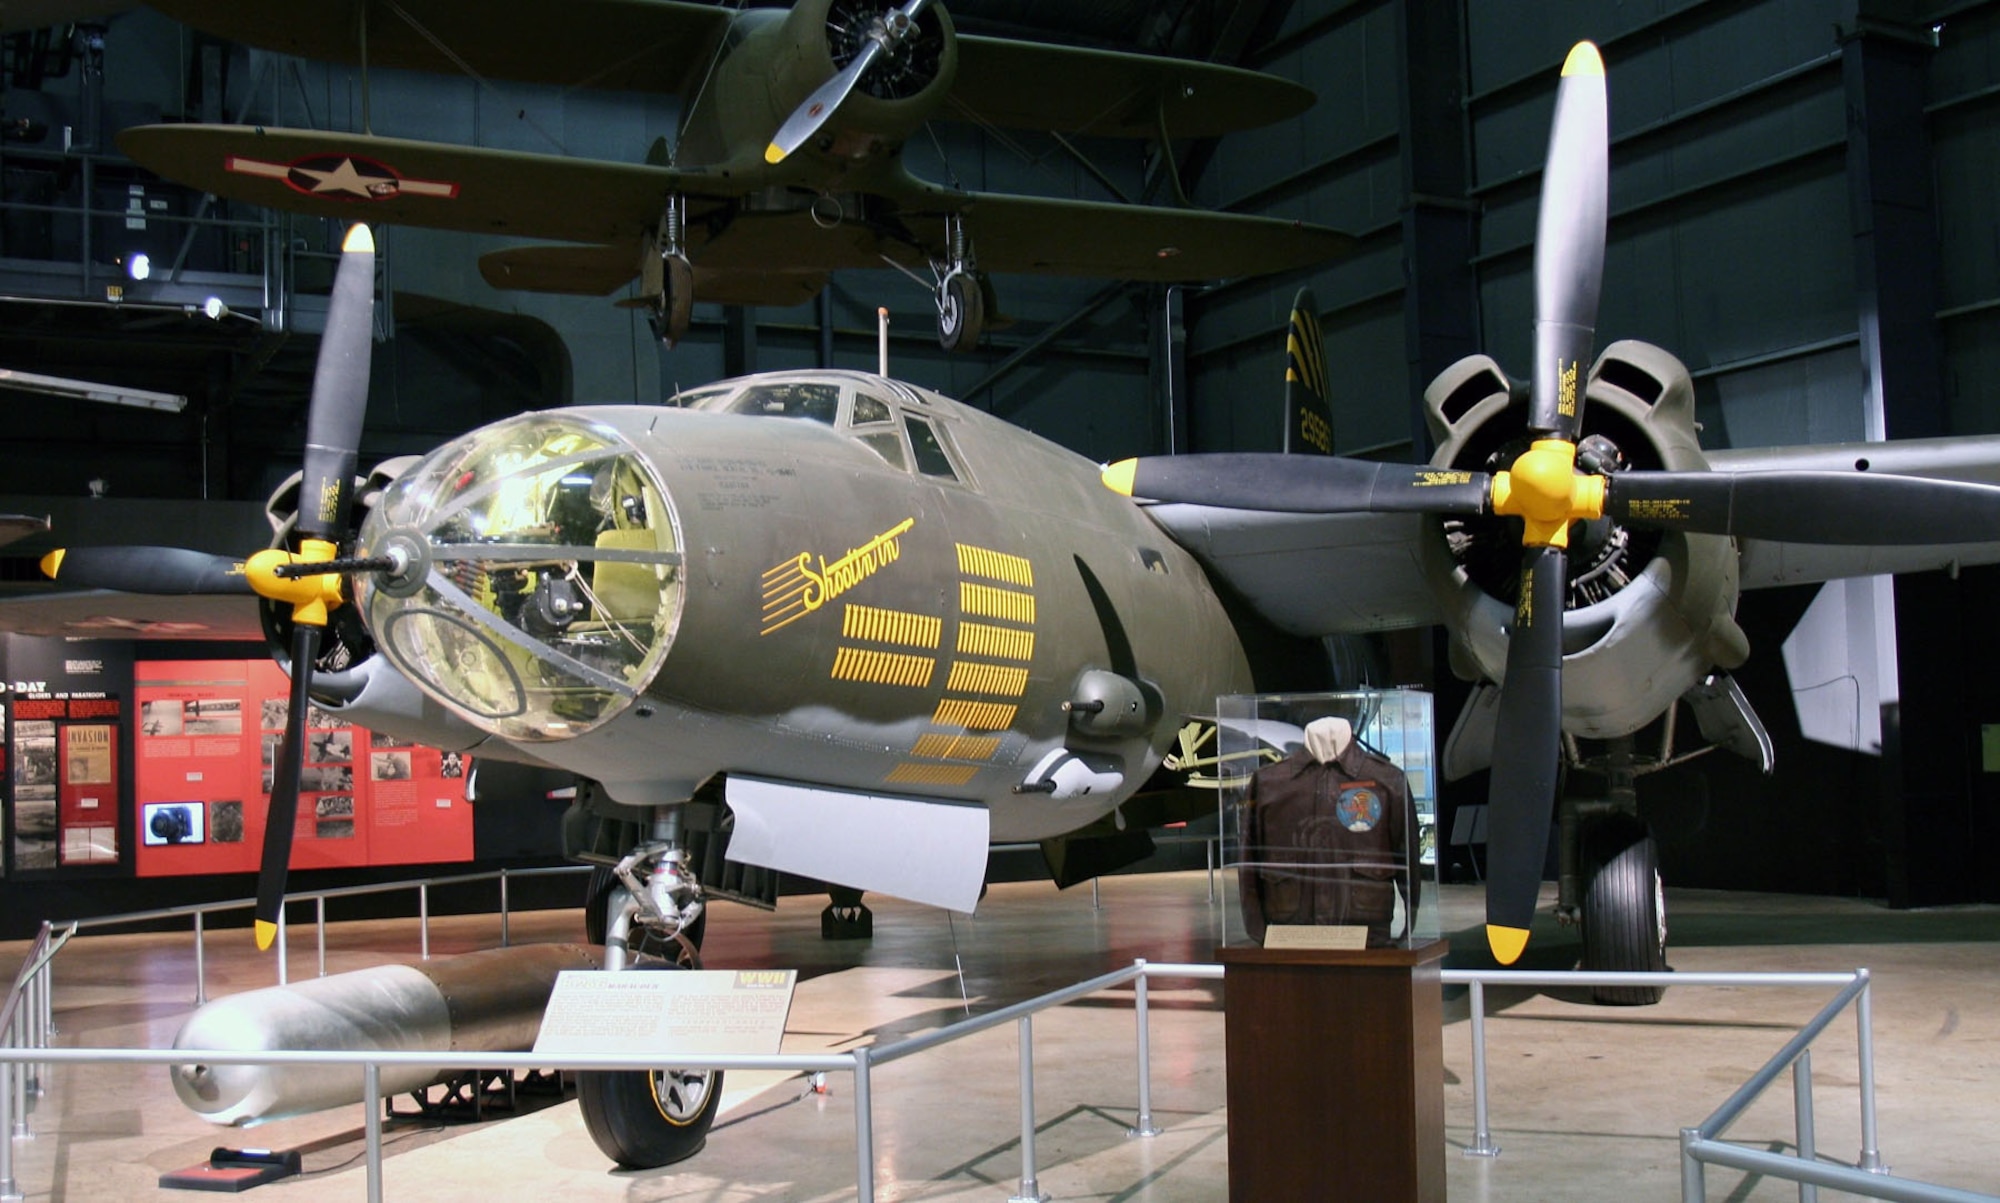 DAYTON, Ohio -- Martin B-26G Marauder in the World War II Gallery at the National Museum of the United States Air Force. (Photo courtesy of Airshow Traveler)